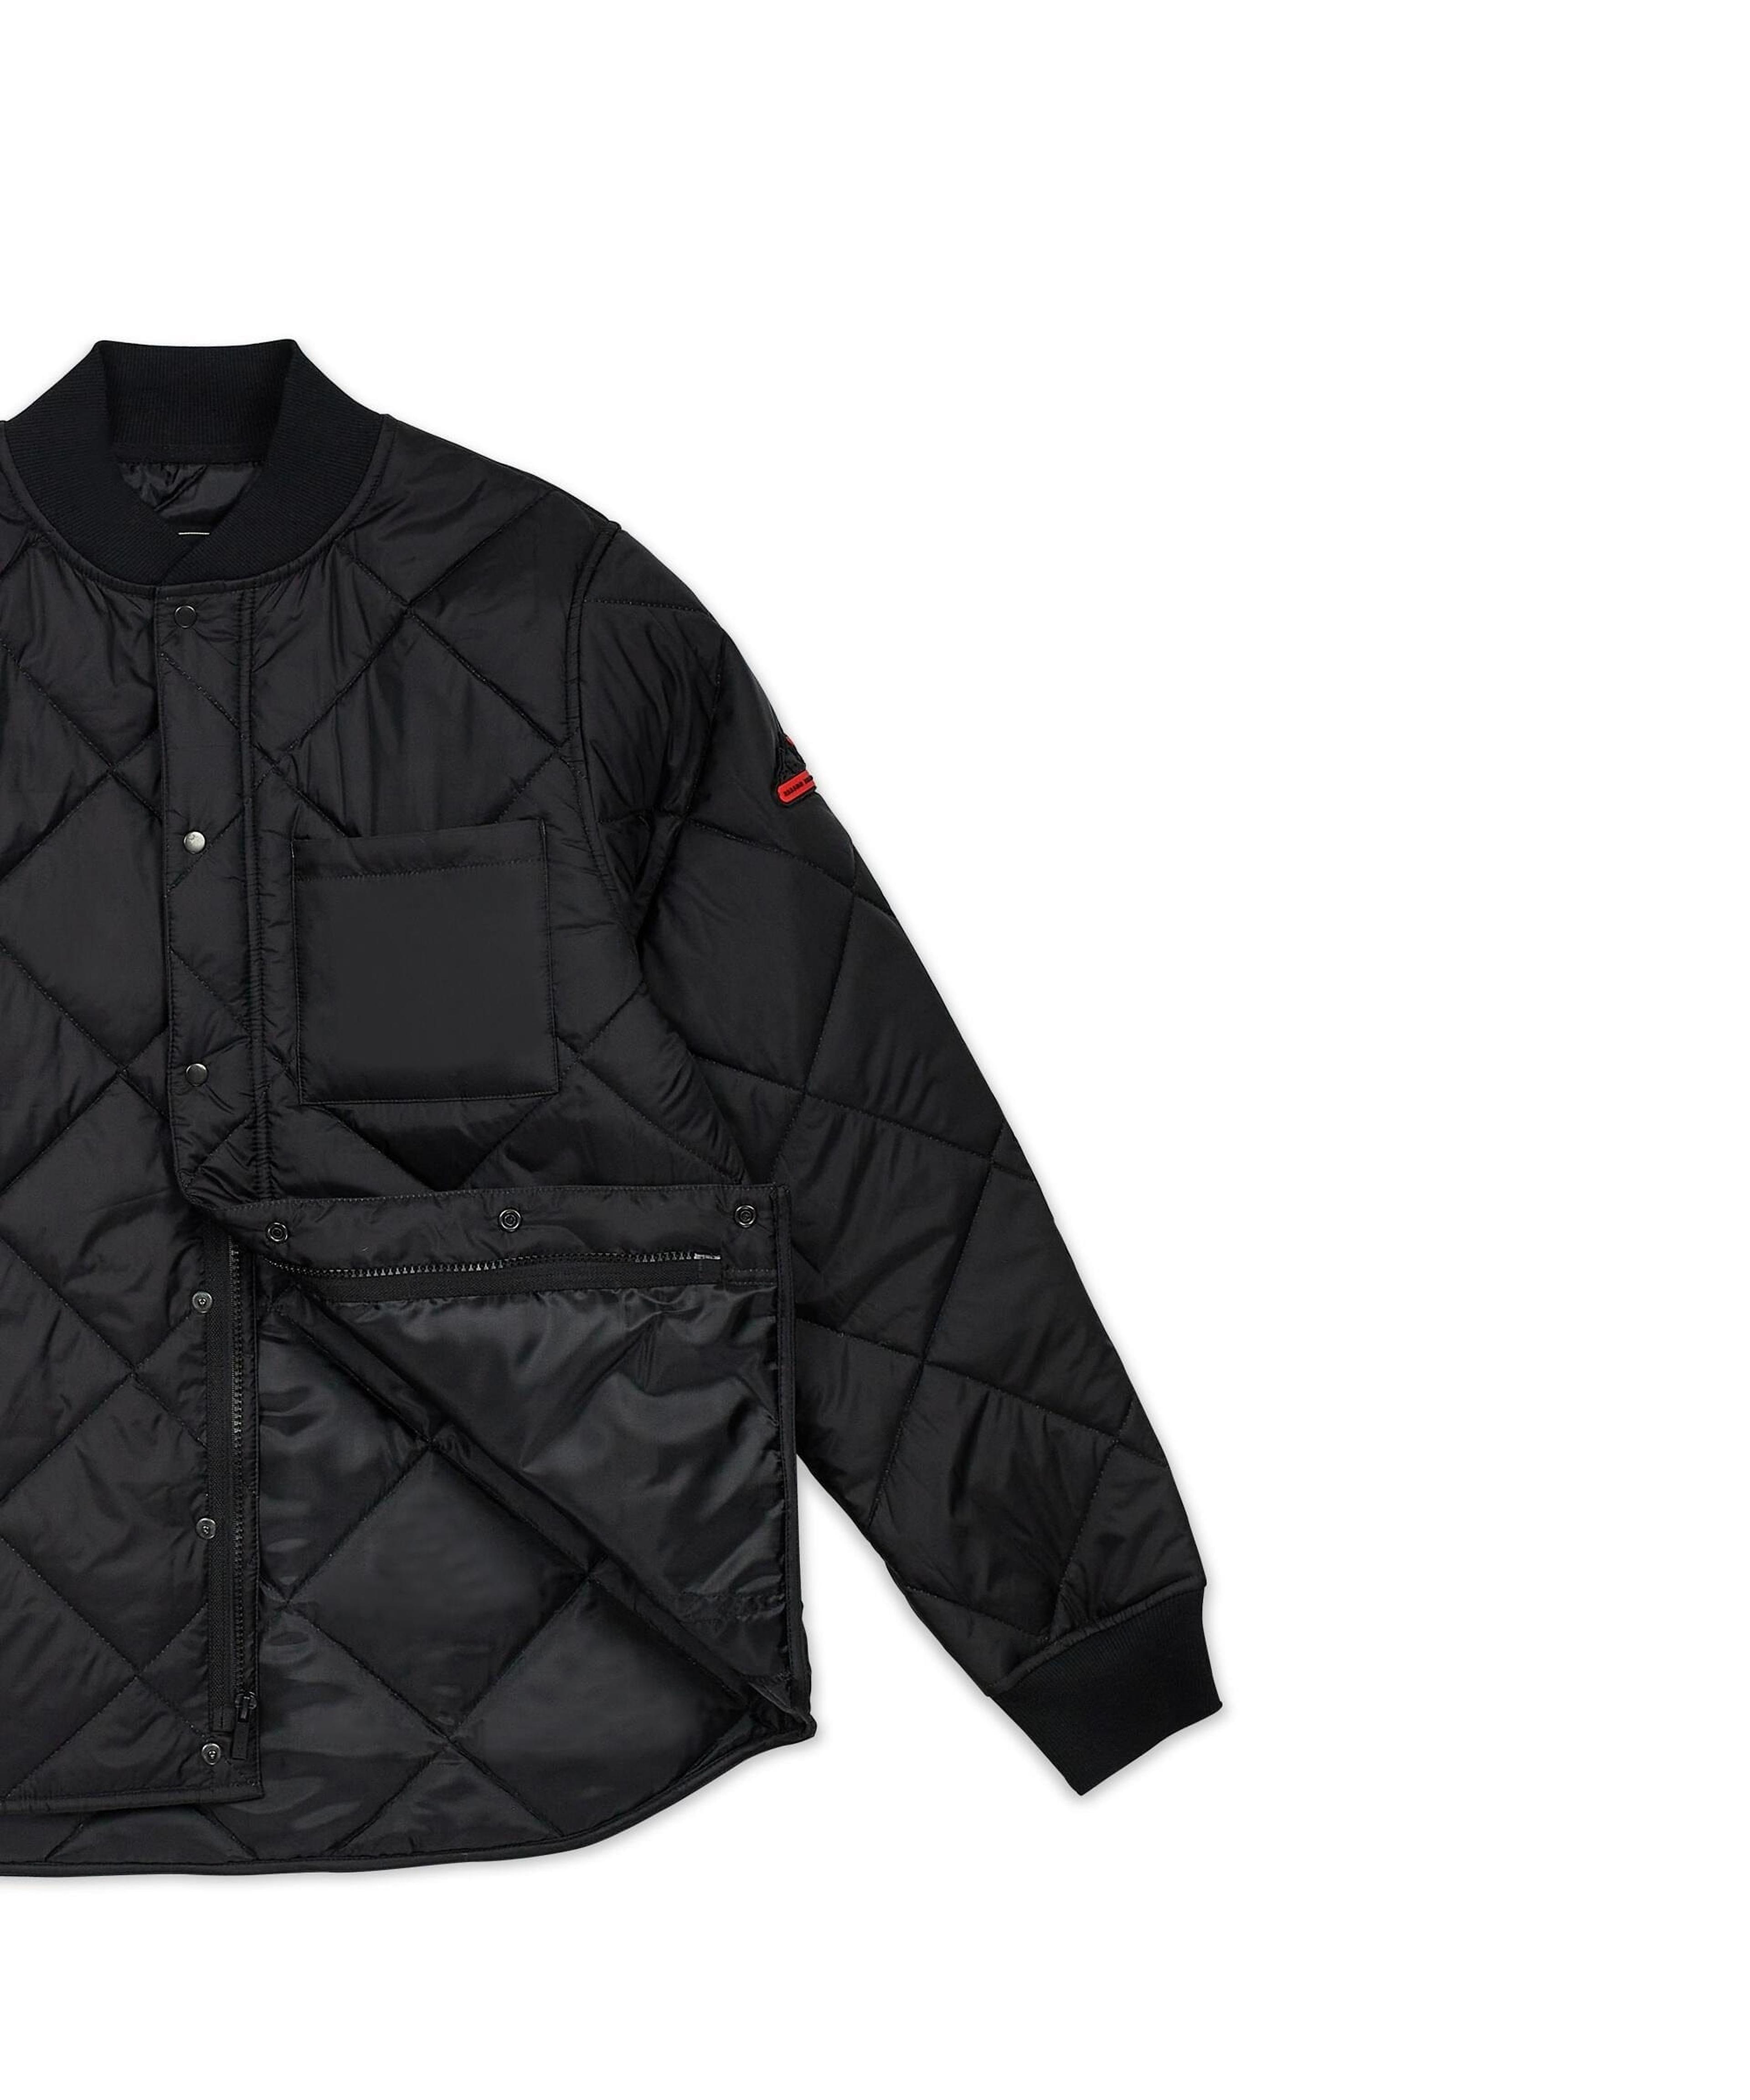 Alternate View 2 of Quilted Shirt Jacket With Lining - Black